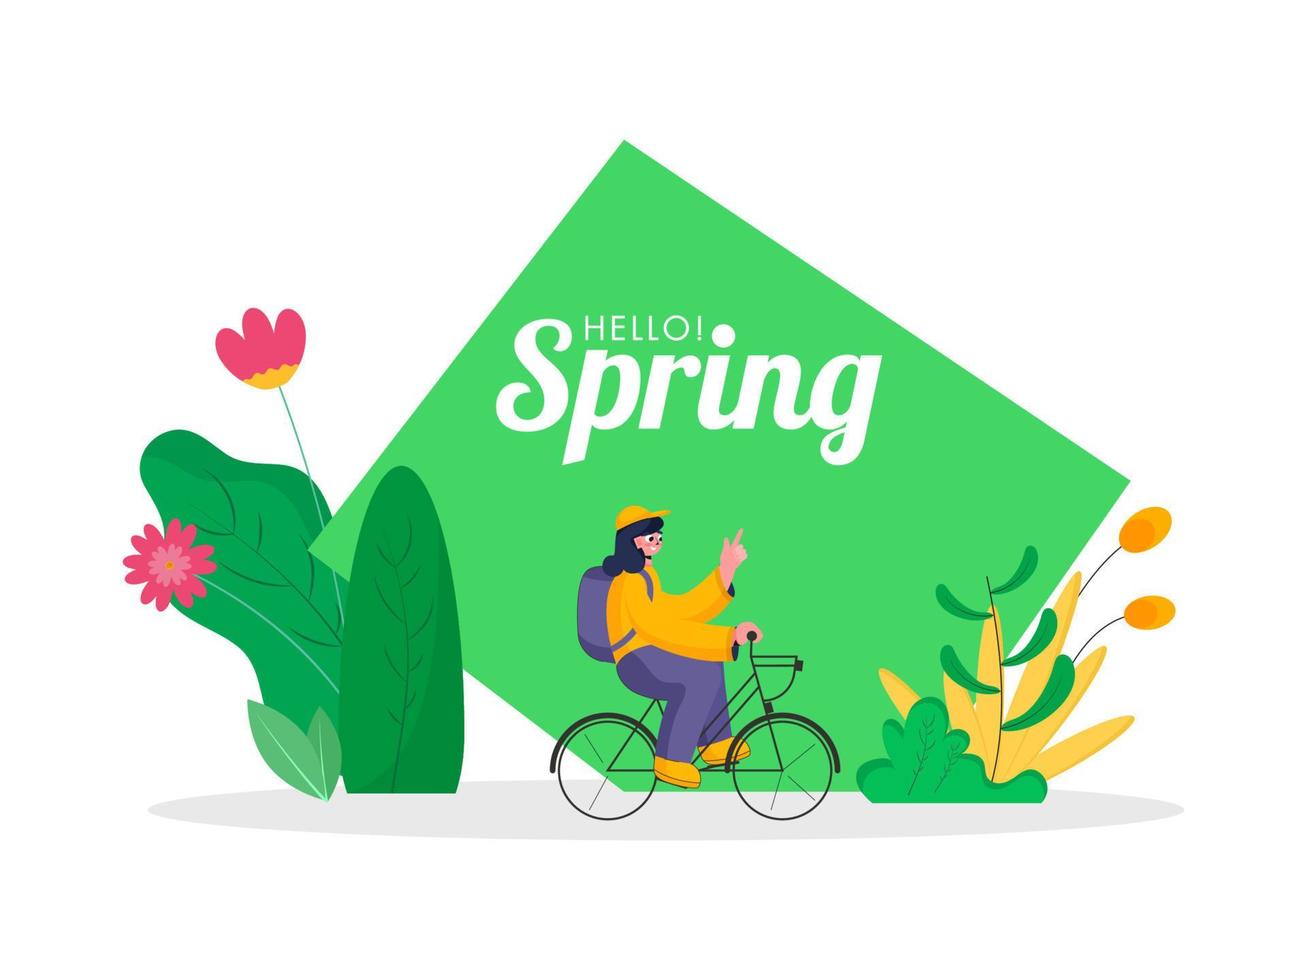 Young Girl Riding a Bicycle with Backpack on Floral Nature Background for Hello Spring. vector